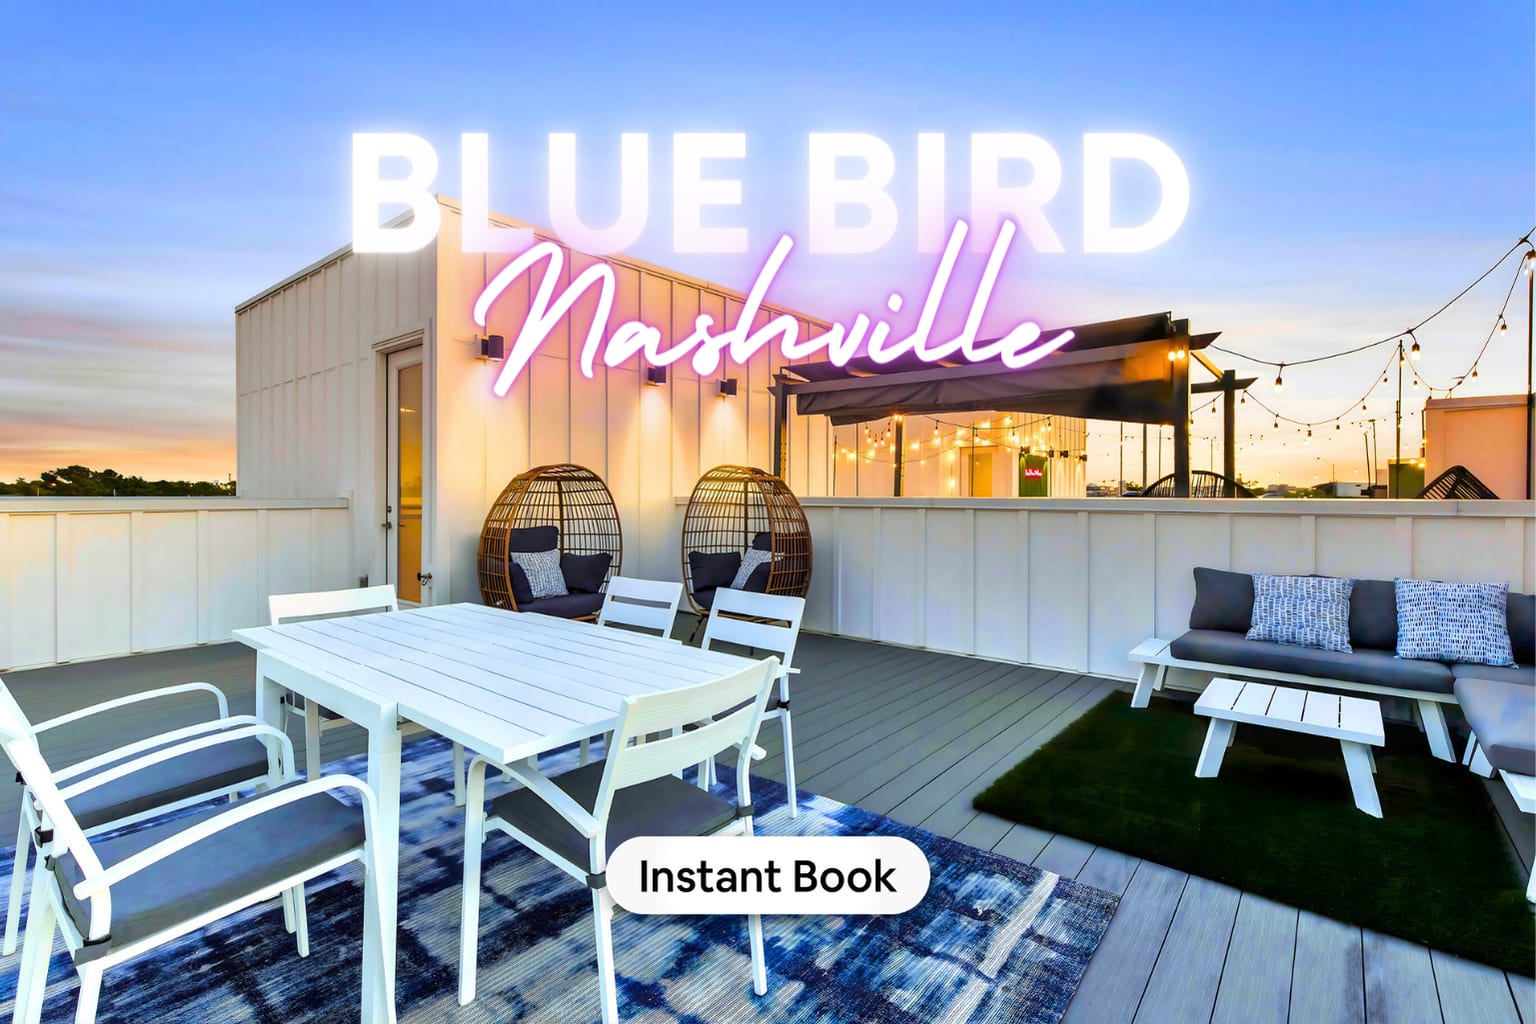 Gather under the glimmer of string lights amidst the Nashville skyline on our picturesque Blue Bird rooftop retreat. This luxurious vacation rental boasts both cozy and chic vibes with plush seating, vibrant neon signage, and an inviting atmosphere, making it the perfect Music City escape for bachelorette parties or group vacations. Immerse yourself in elegance and unwind as dusk envelops the city—yours to enjoy with friends and family.

Book your stay at Misfit Homes today!